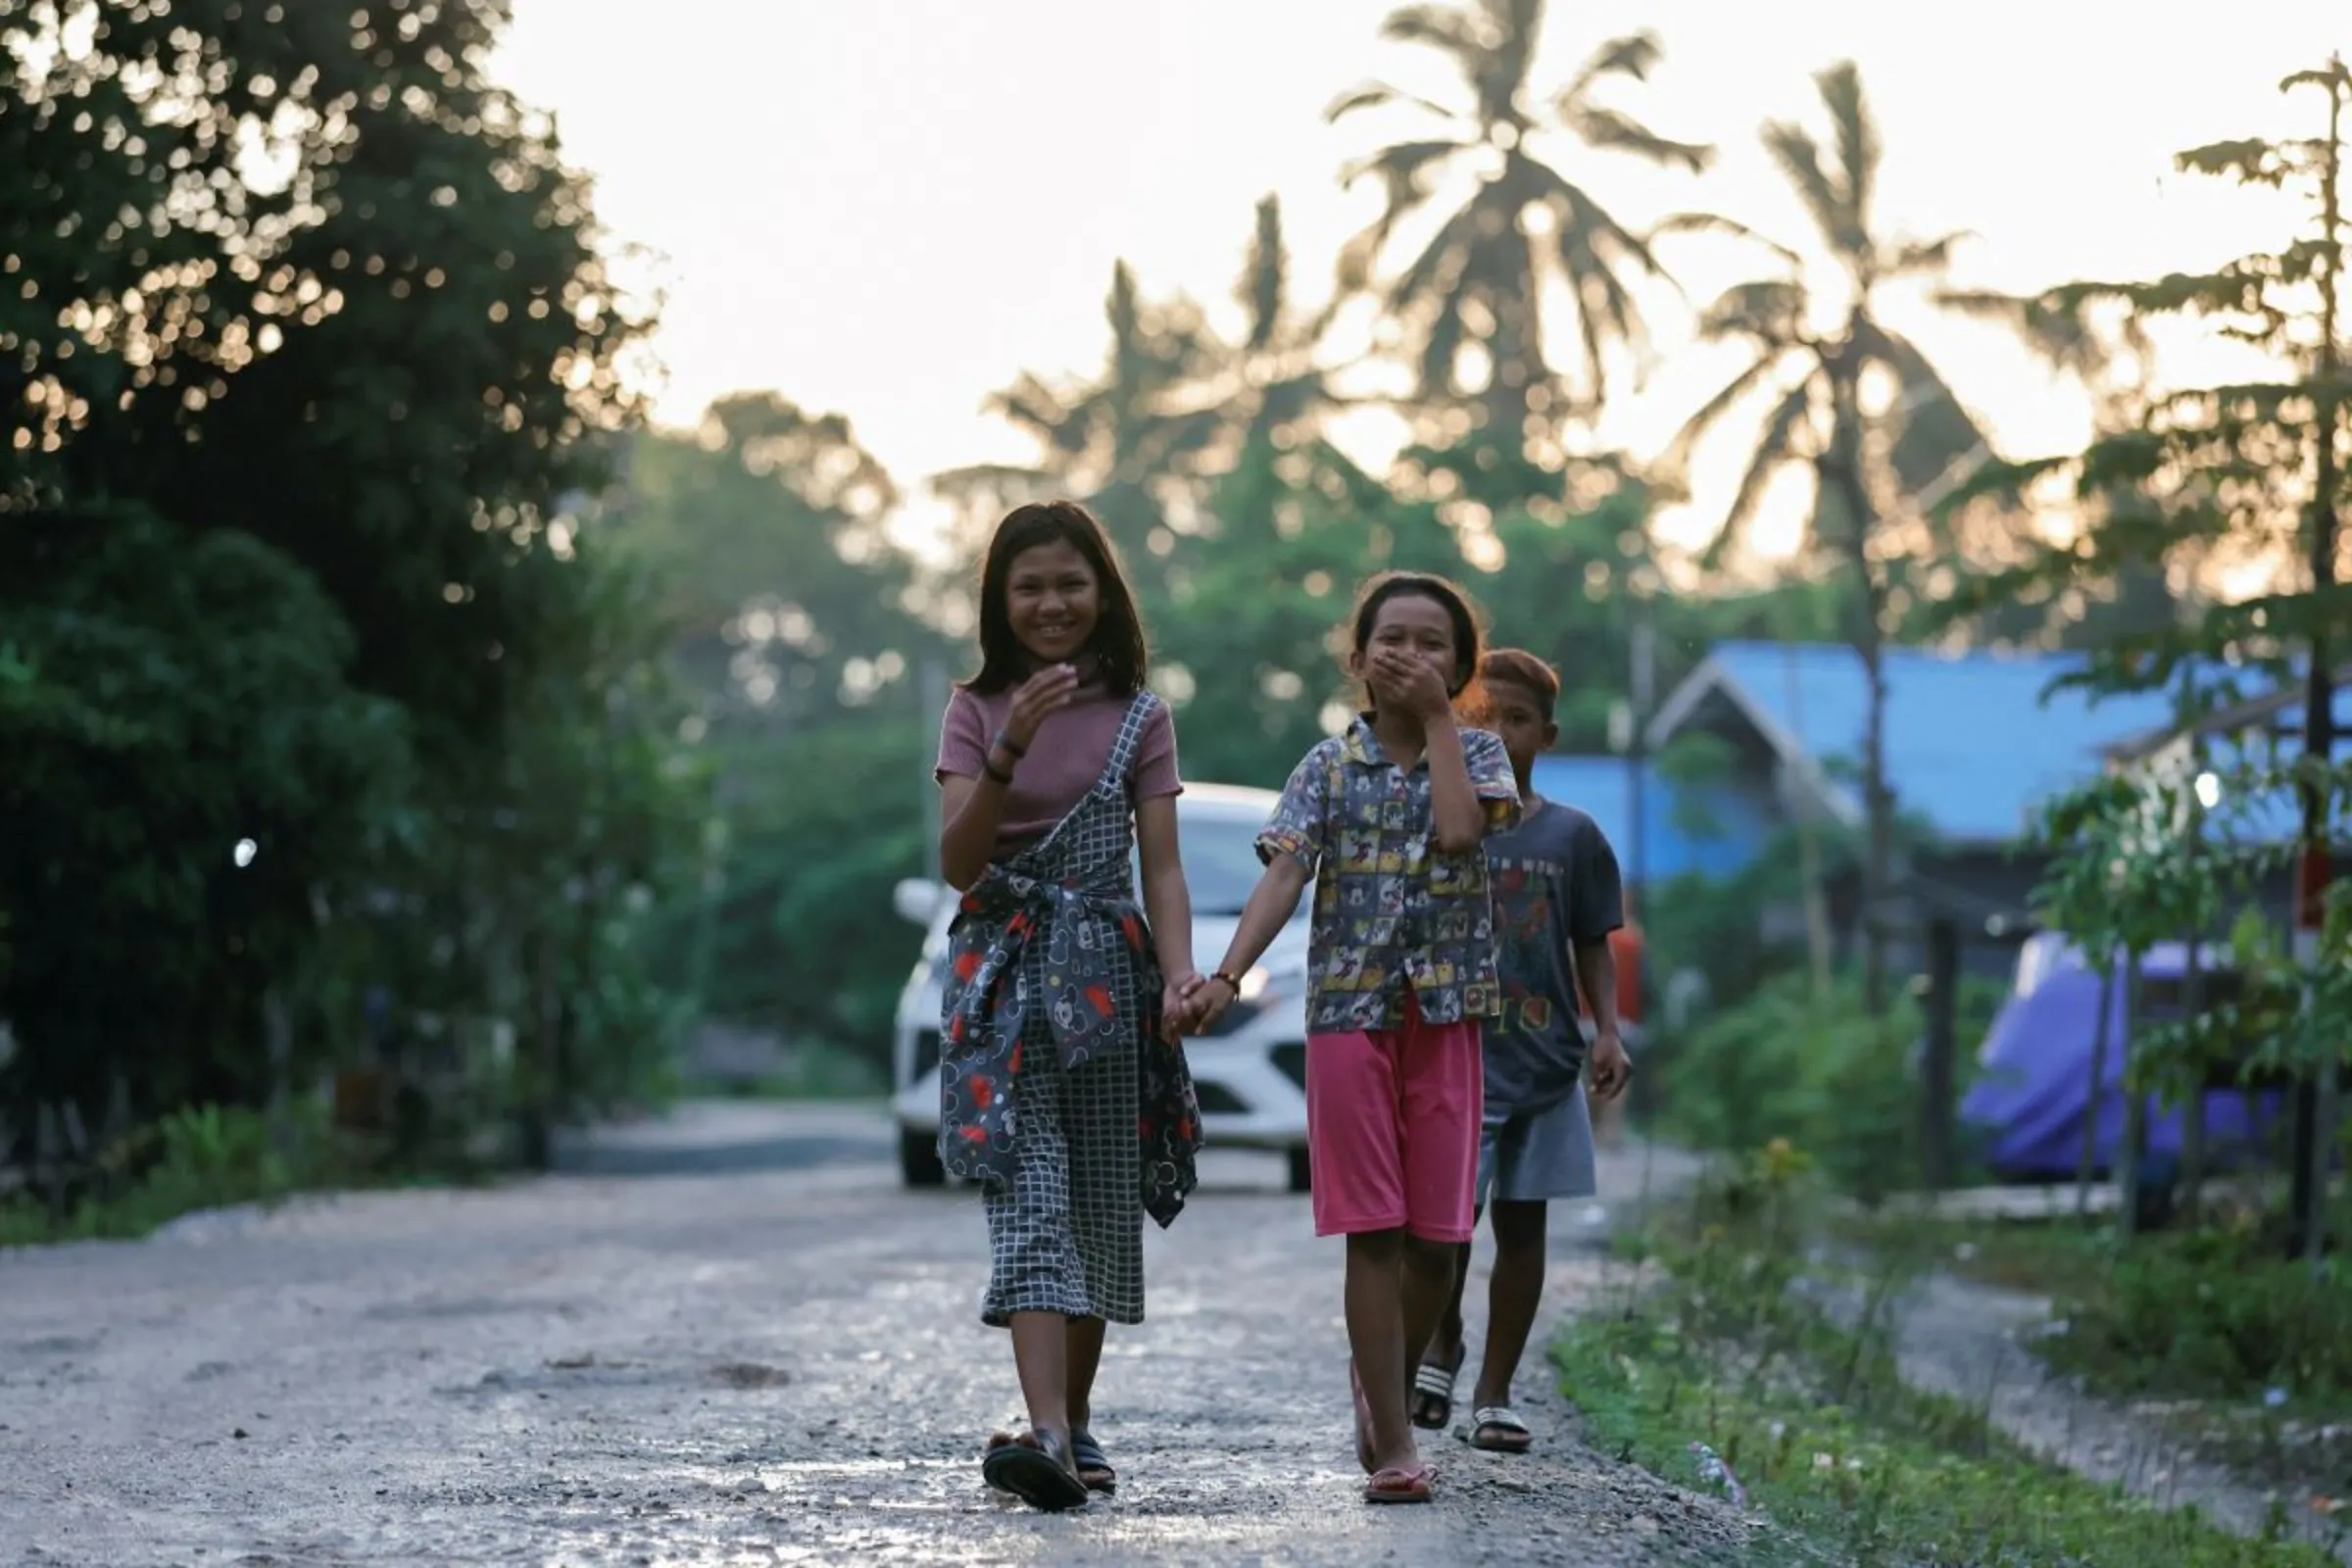 Indigenous Balik tribe's children react to camera as they walk along a road at their village, located near the Indonesia's projected new capital known as Nusantara National Capital, in Sepaku, East Kalimantan province, Indonesia, March 6, 2023